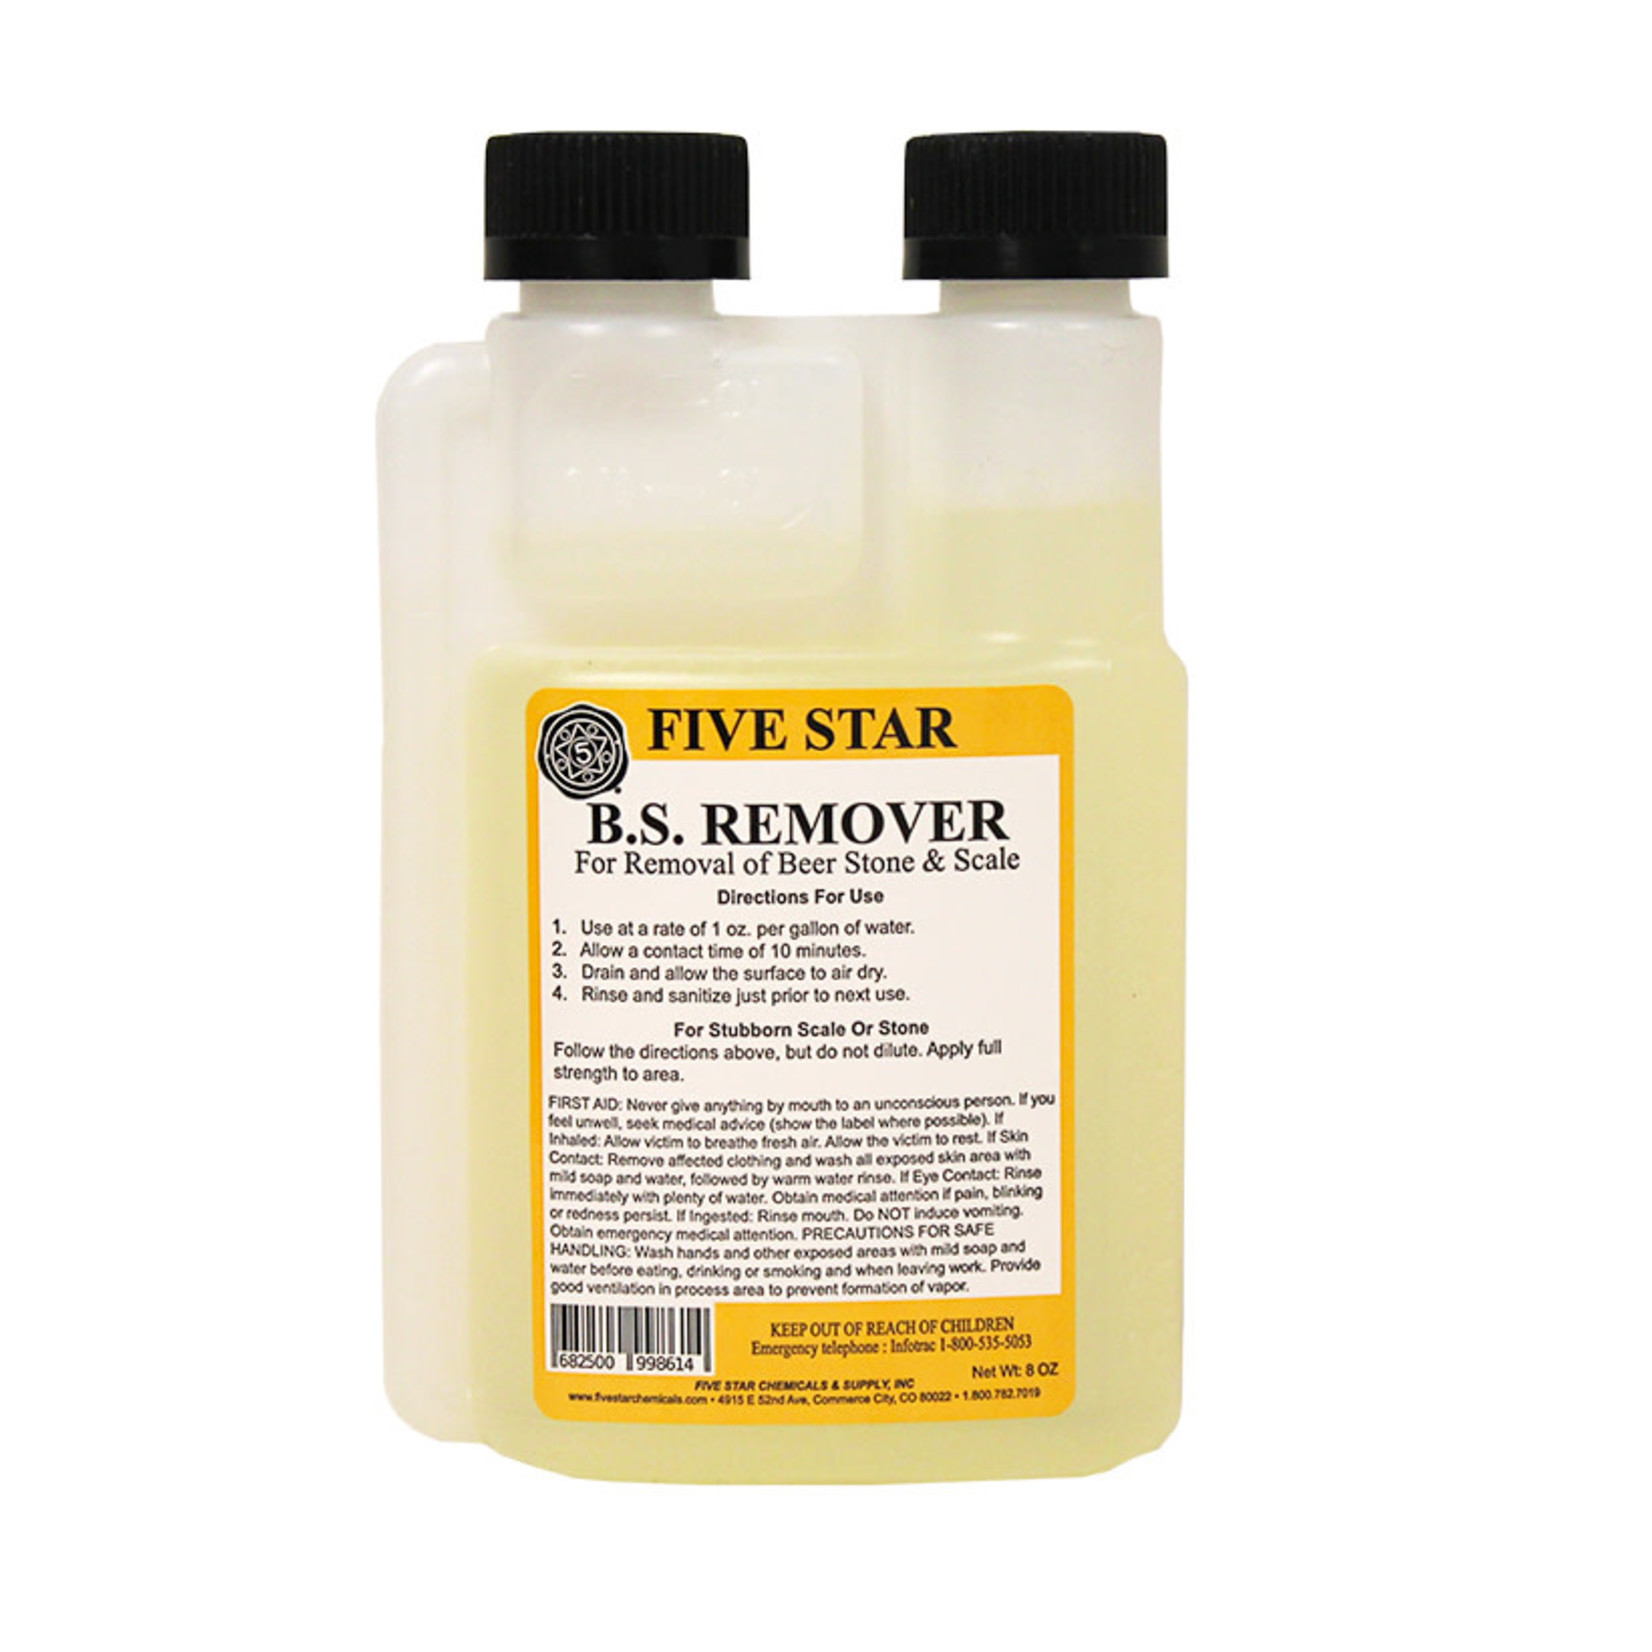 Five Star B.S. Beer Stone Remover 8 oz